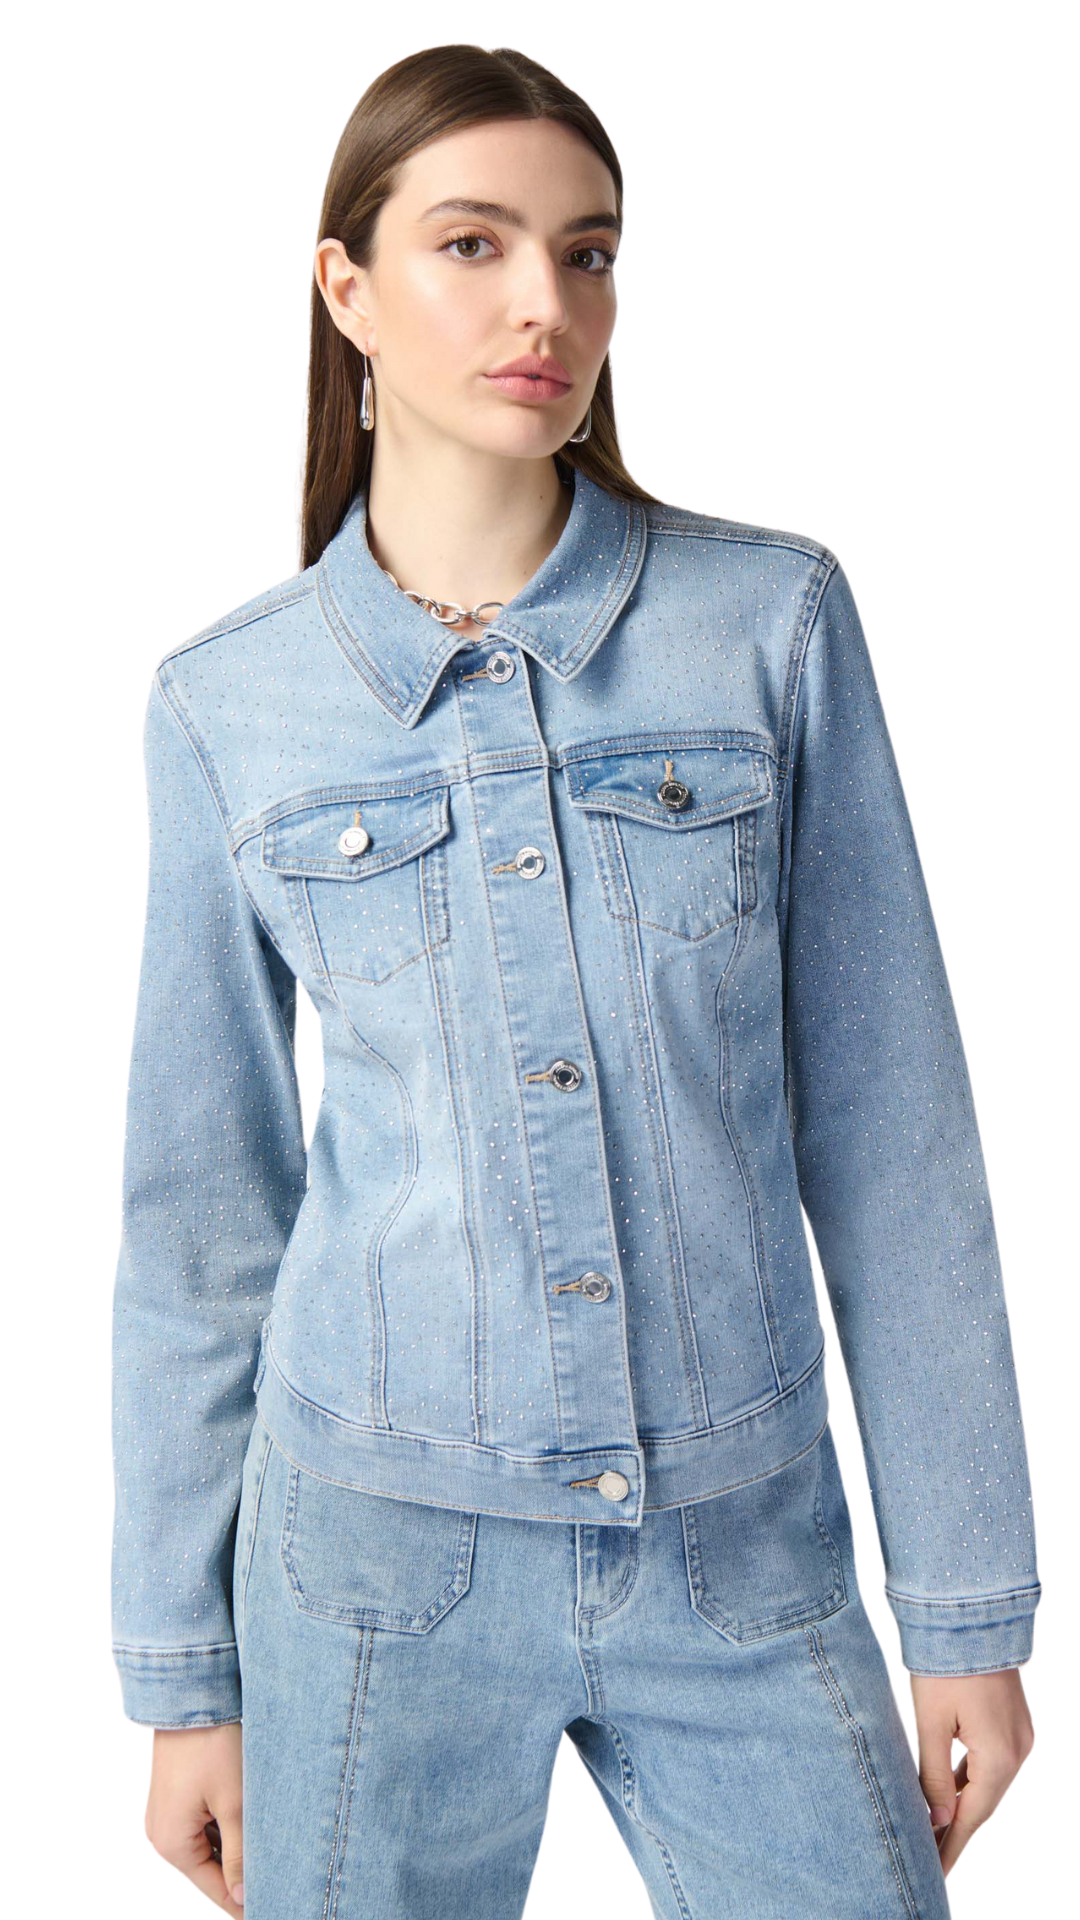 Fitted Denim Jacket With Allover Rhinestones. Style JR241914